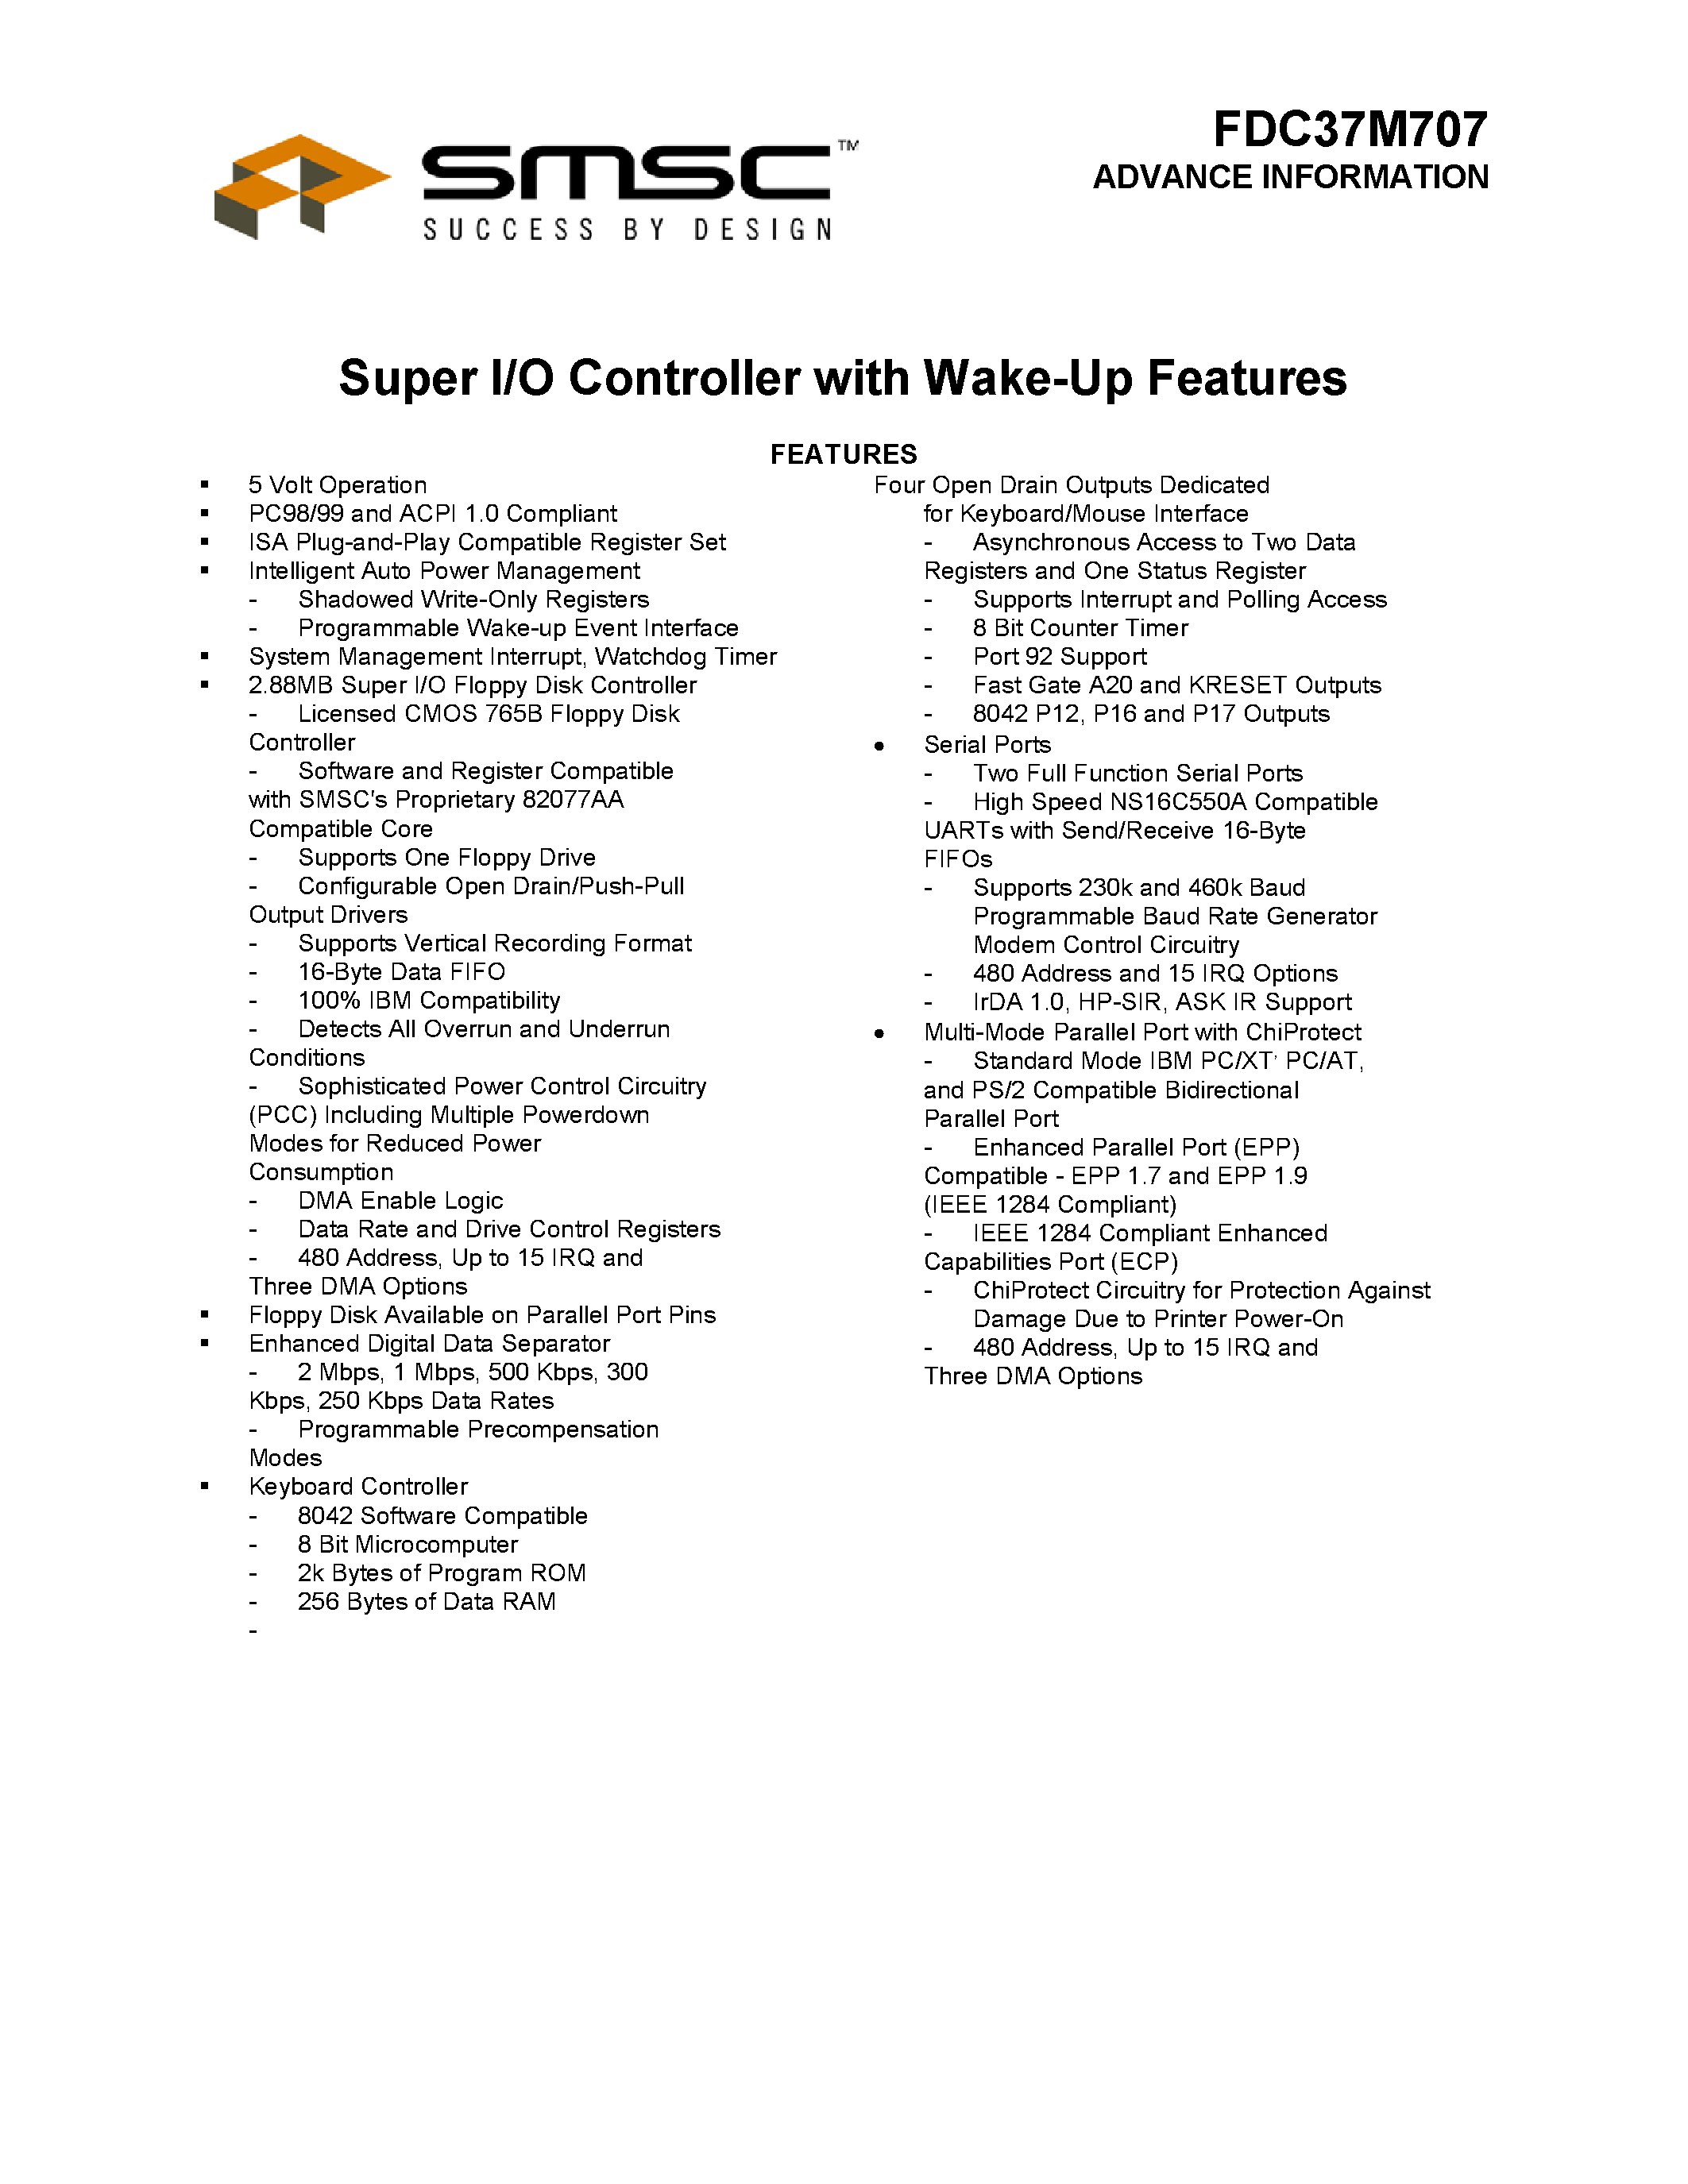 Datasheet FDC37M707 - SUPER I/O CONTROLLER WITH WAKE UP FEATURES page 1